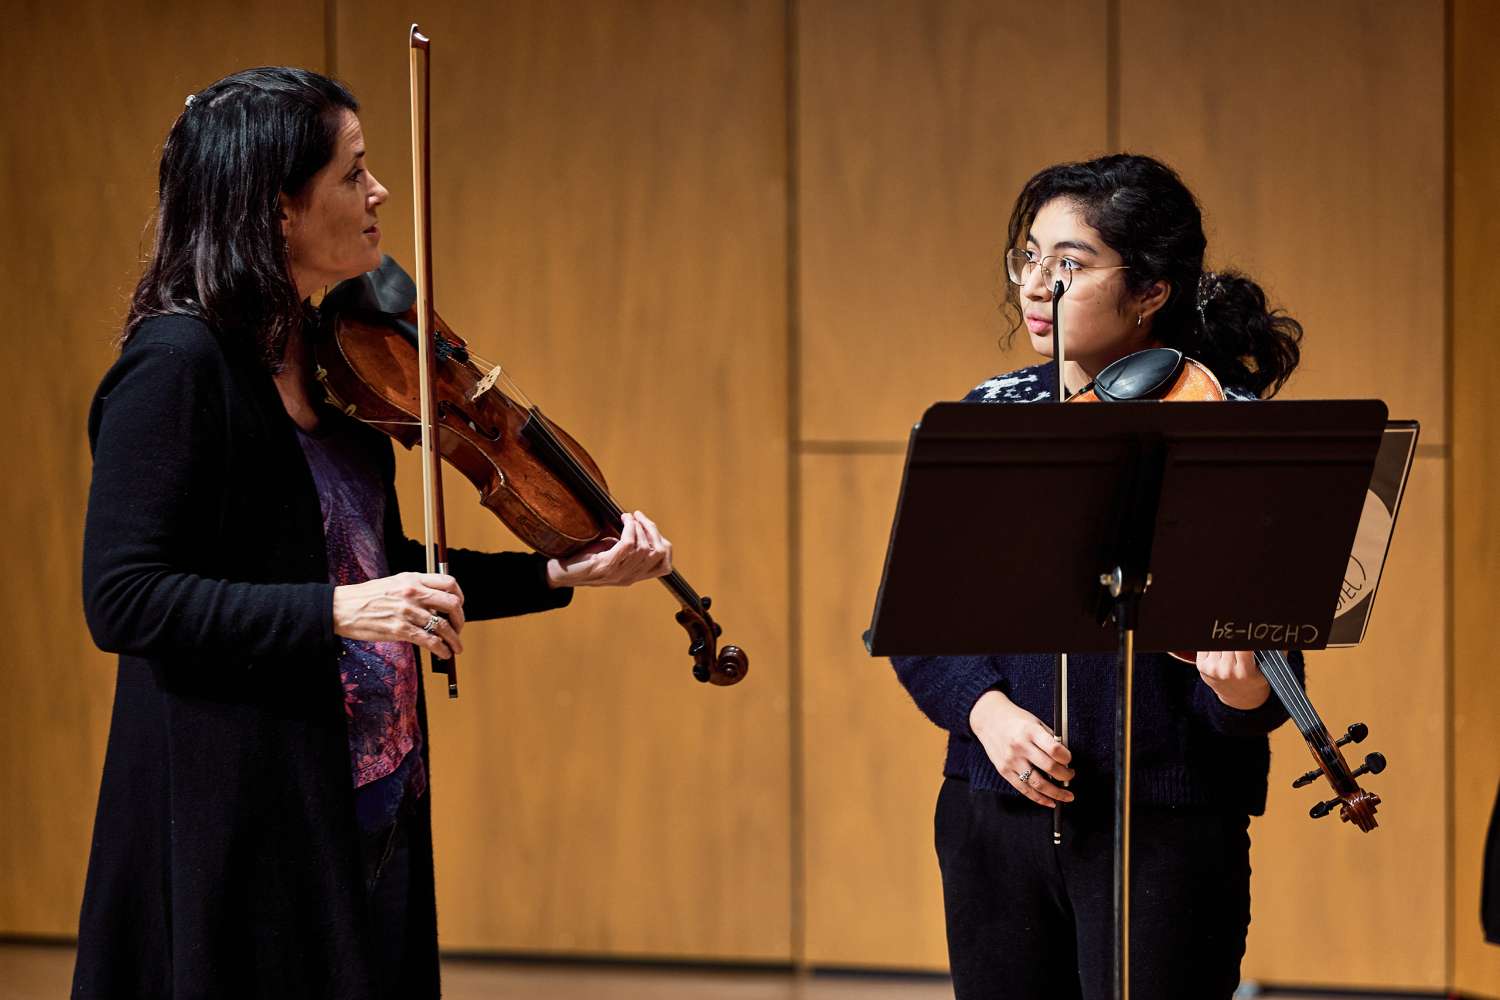 Female student playing violin listens to female instructor.